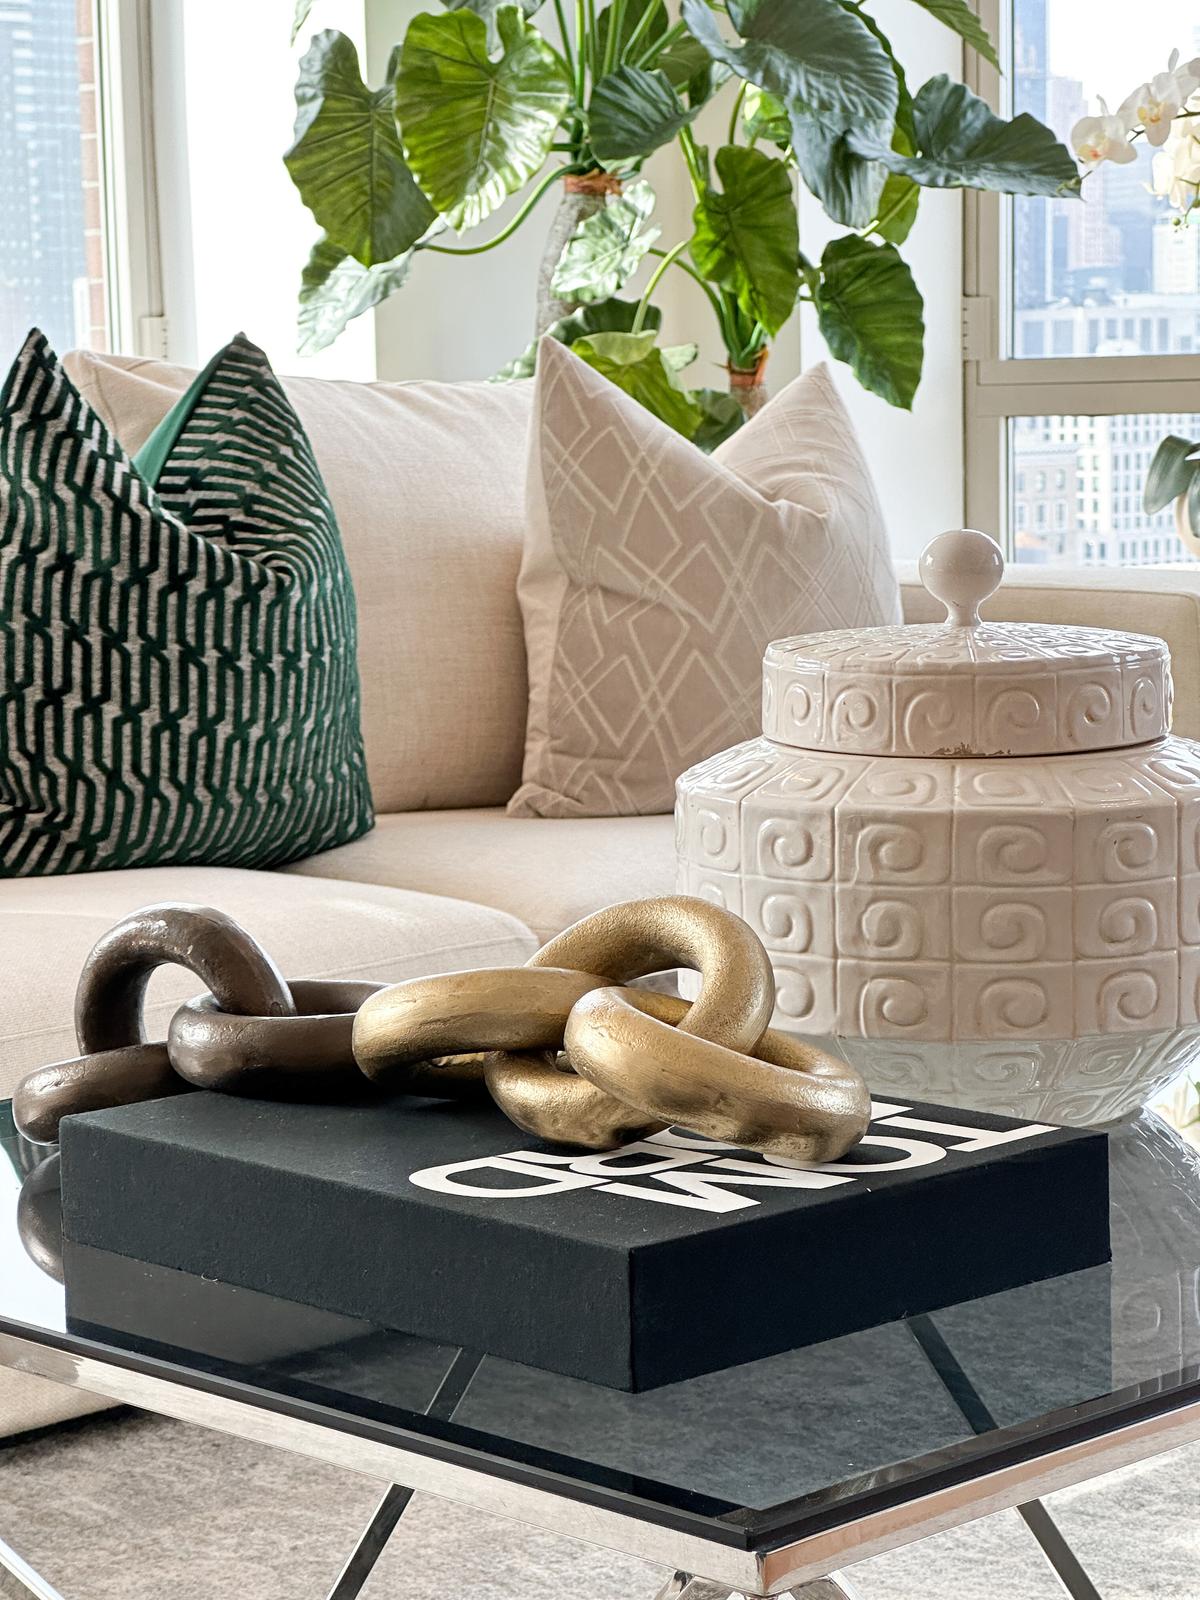 Black, gold and white accessories add to an existing neutral color palette. (Provided photo/TNS)